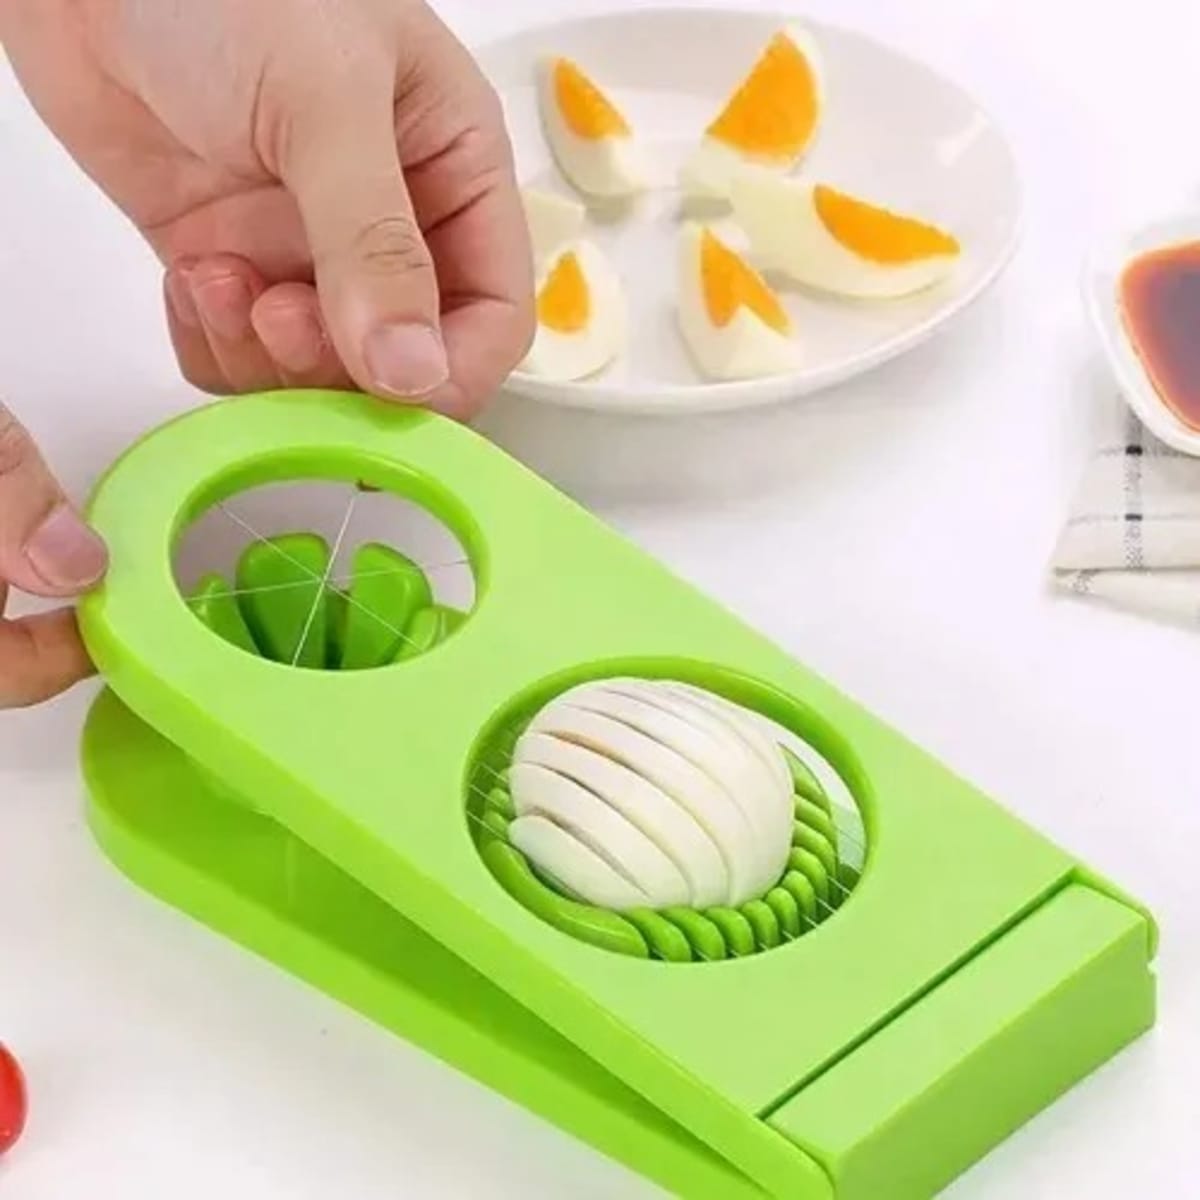 What else you can do with an egg slicer